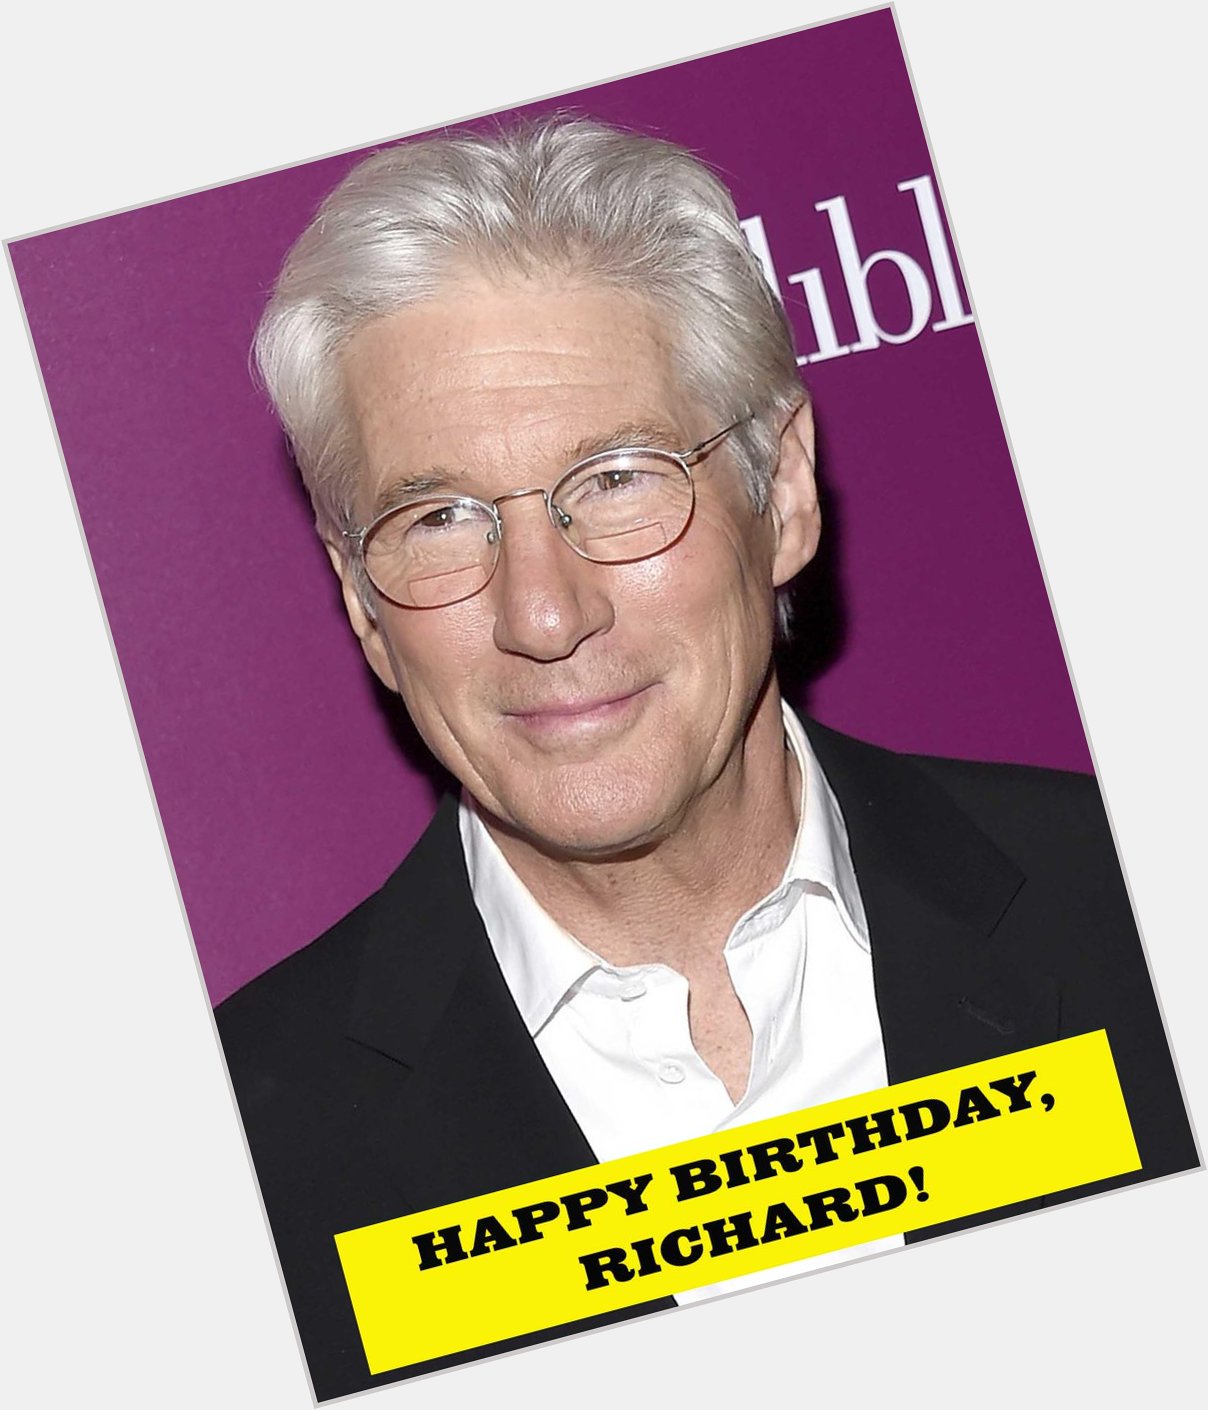 Happy Birthday to a great actor whose charisma still shines through on the big screen, Richard Gere. 